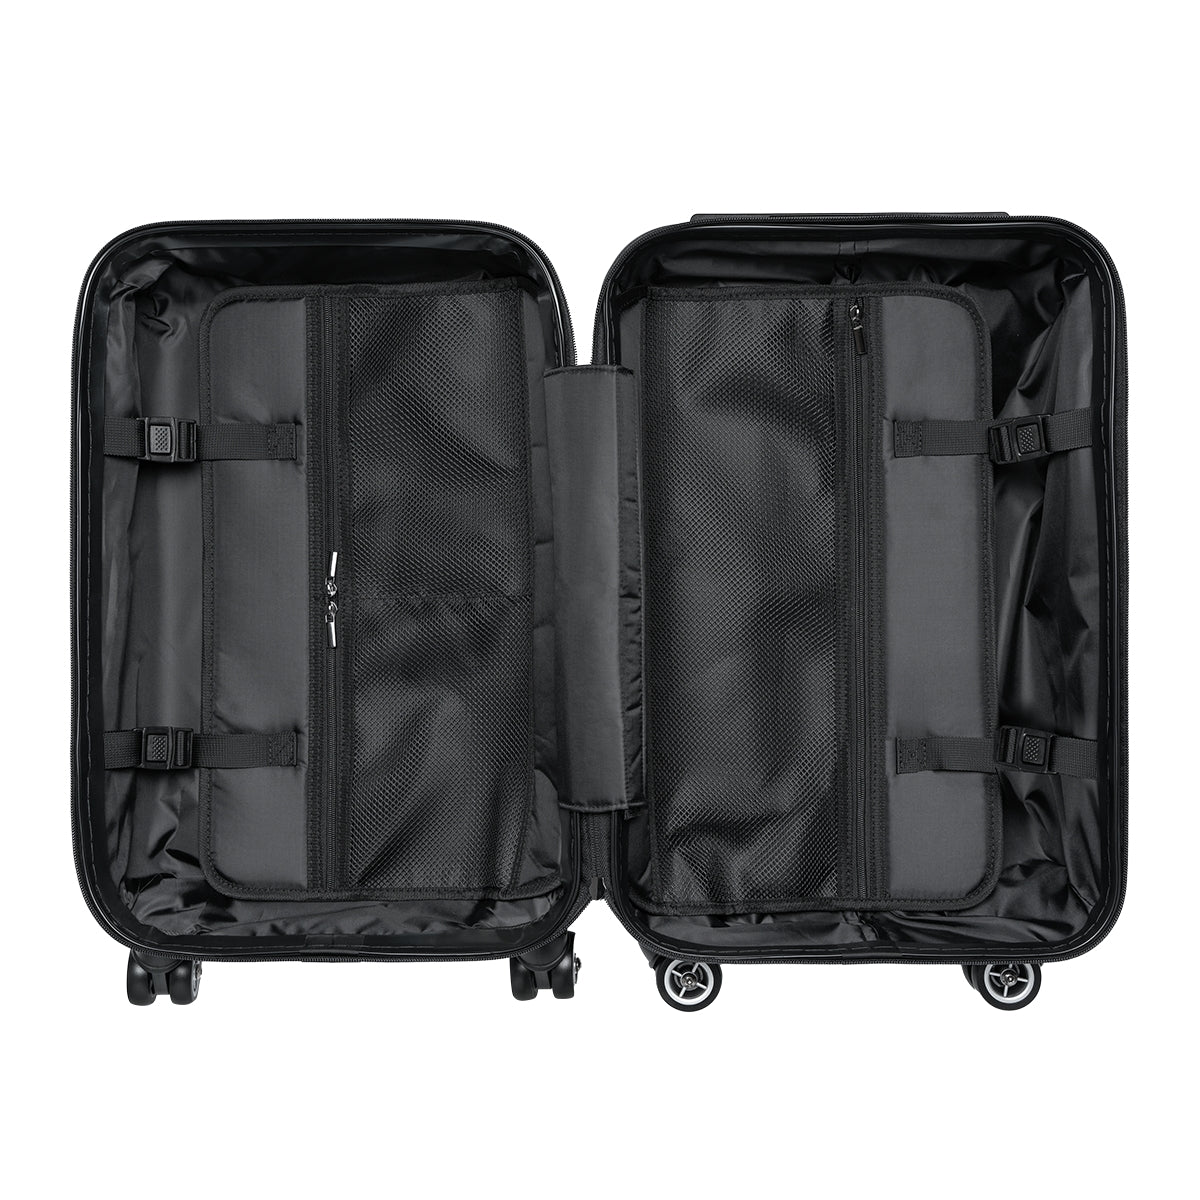 Getrott Johnny Cash Black Cabin Suitcase Inner Pockets Extended Storage Adjustable Telescopic Handle Inner Pockets Double wheeled Polycarbonate Hard-shell Built-in Lock Carry-On Travel Check Luggage 4-Wheel Spinner Suitcase Bag Multiple Colors and Sizes